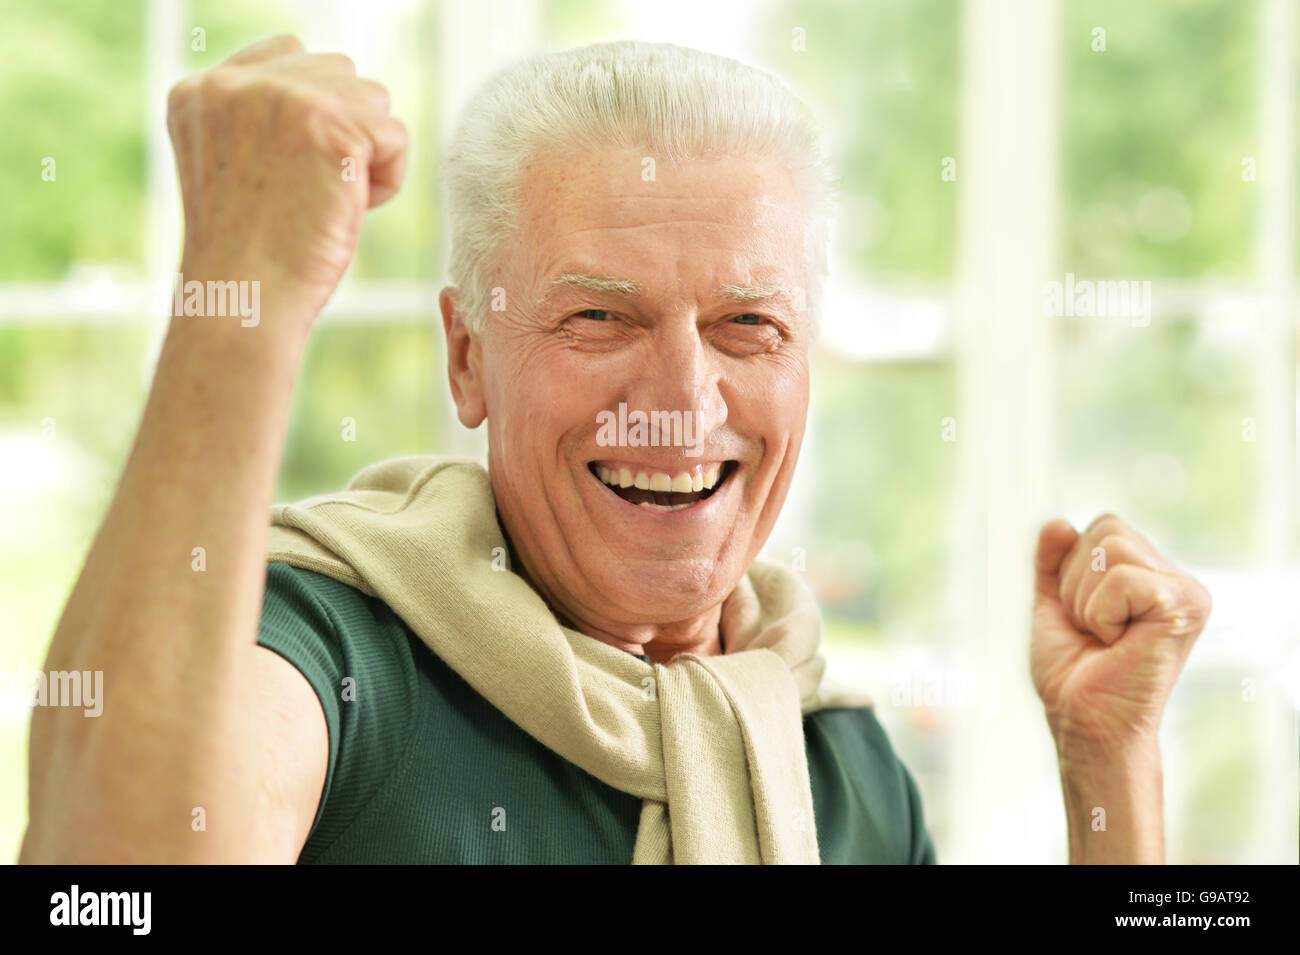 Senior man  with hands up Stock Photo